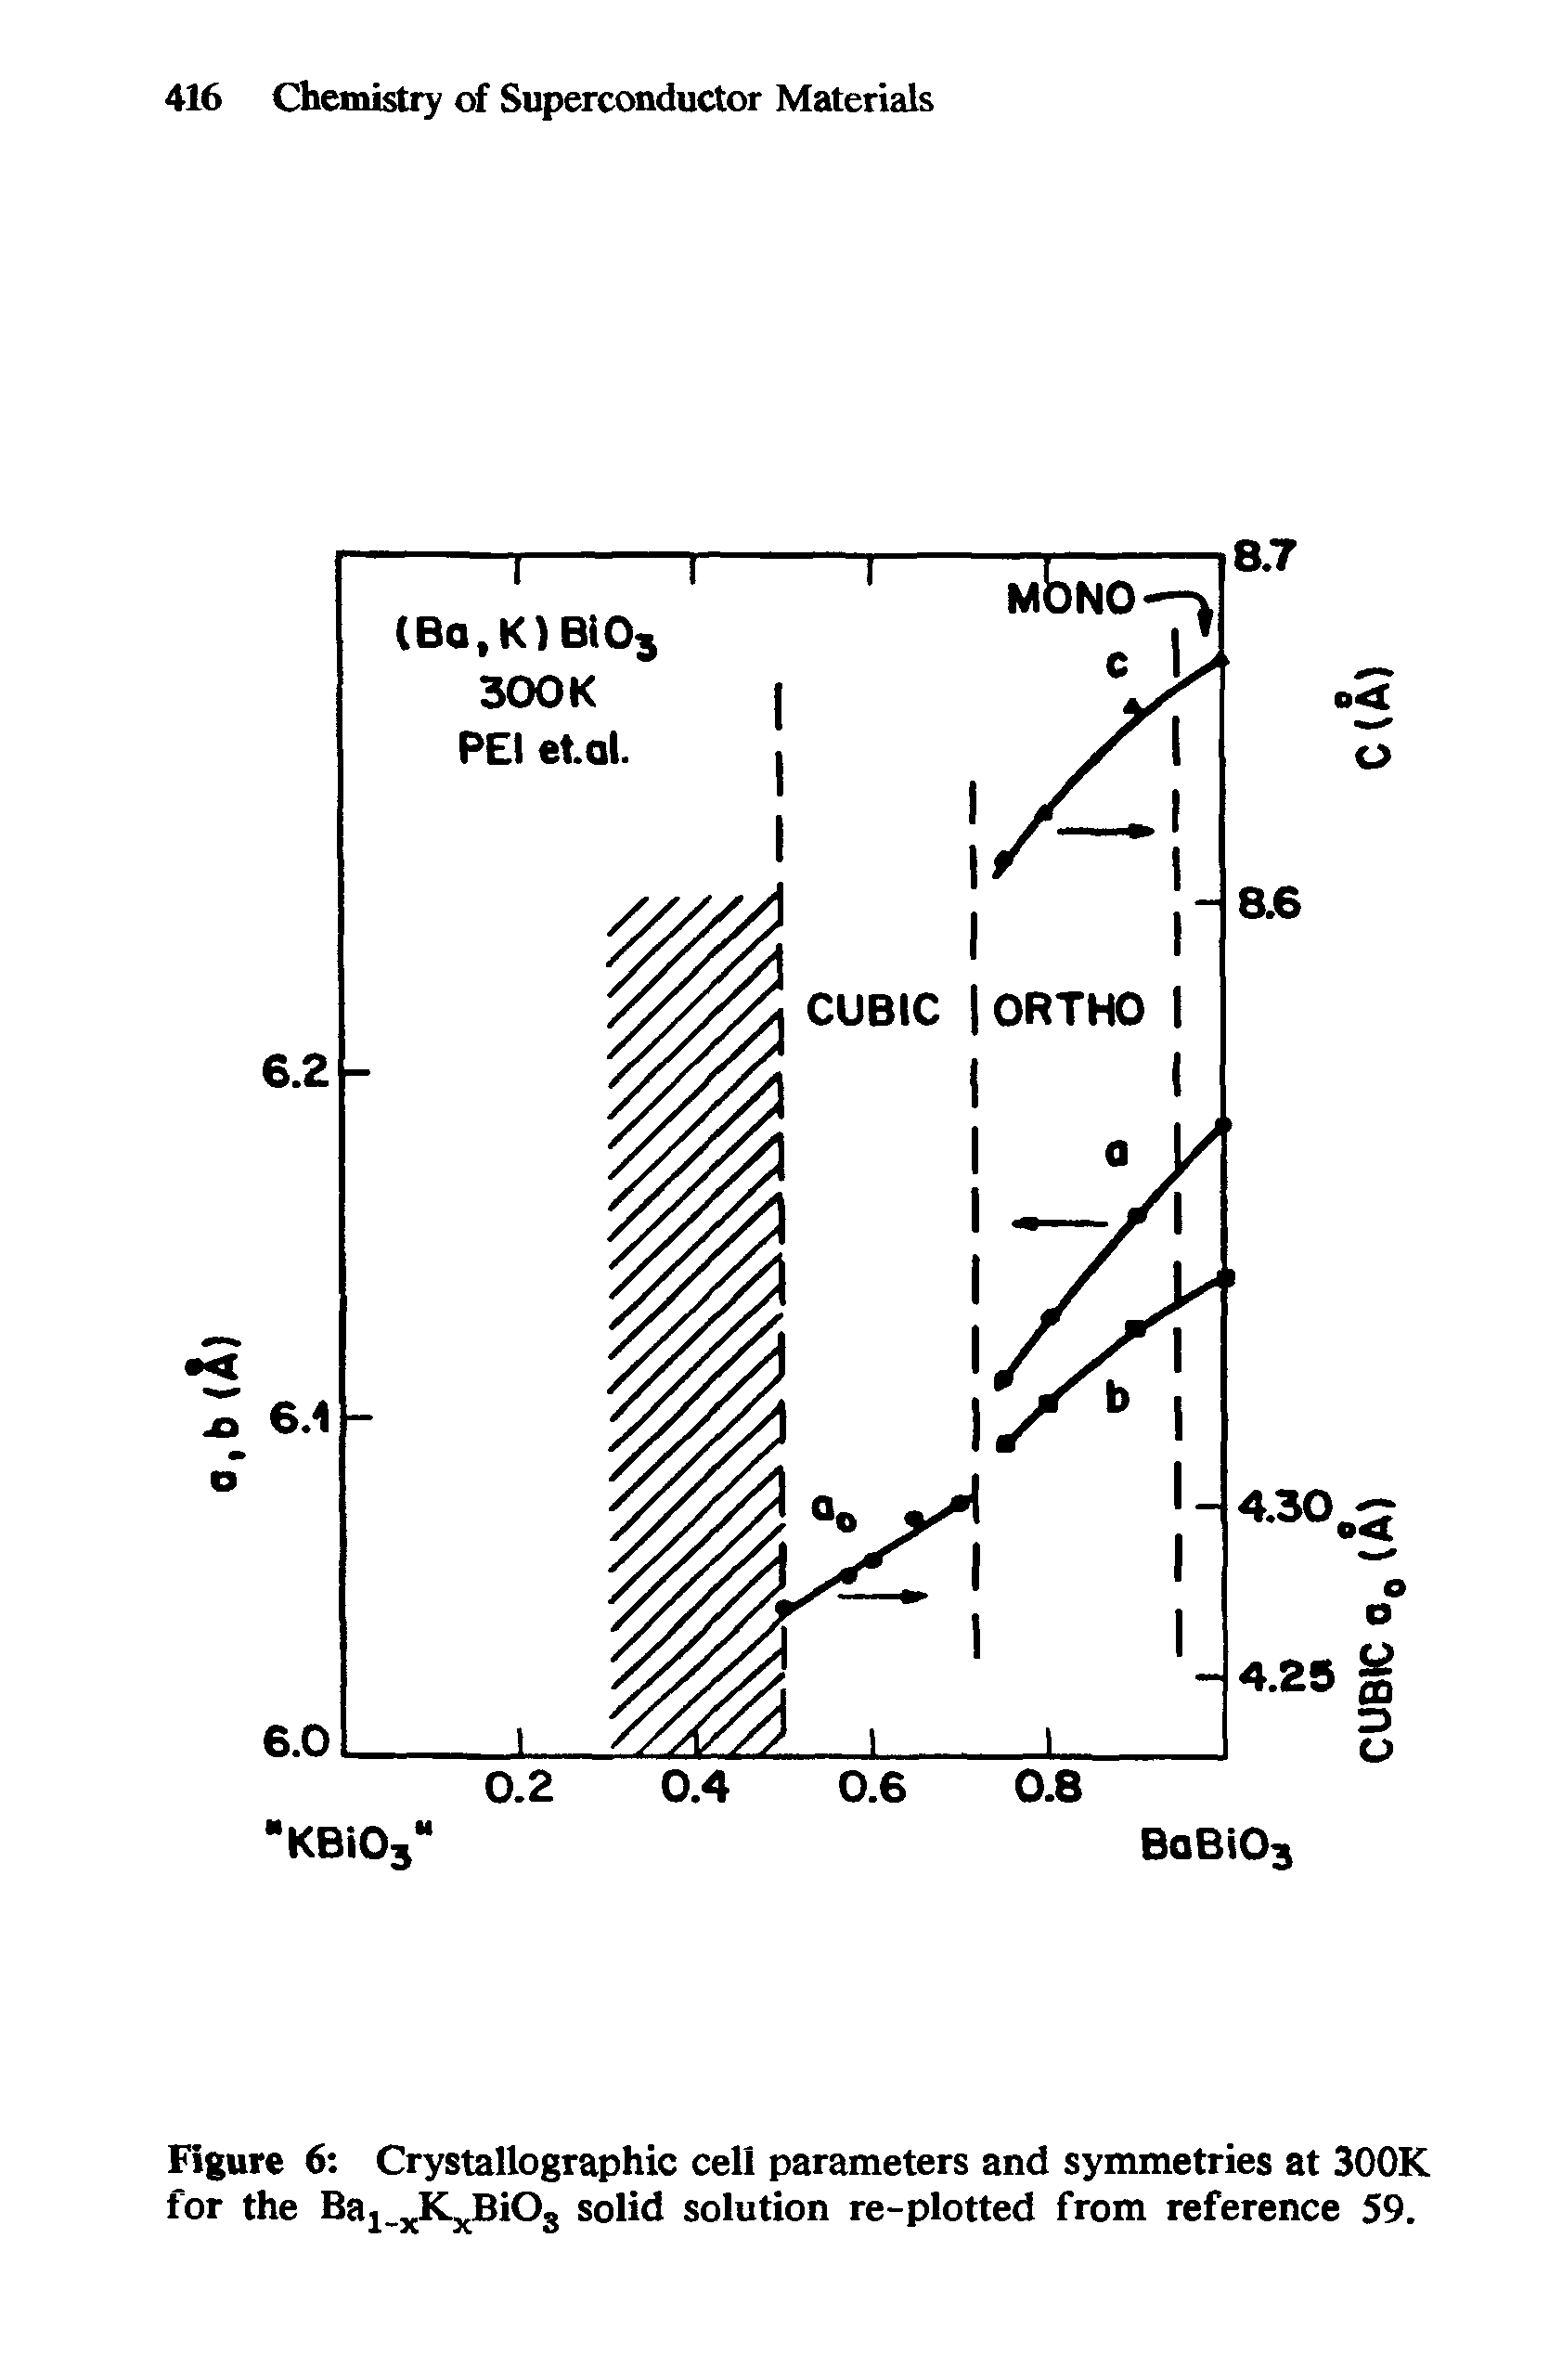 Figure 6 Crystallographic cell parameters and symmetries at 300K for the Ba K BiOg solid solution re-plotted from reference 59.